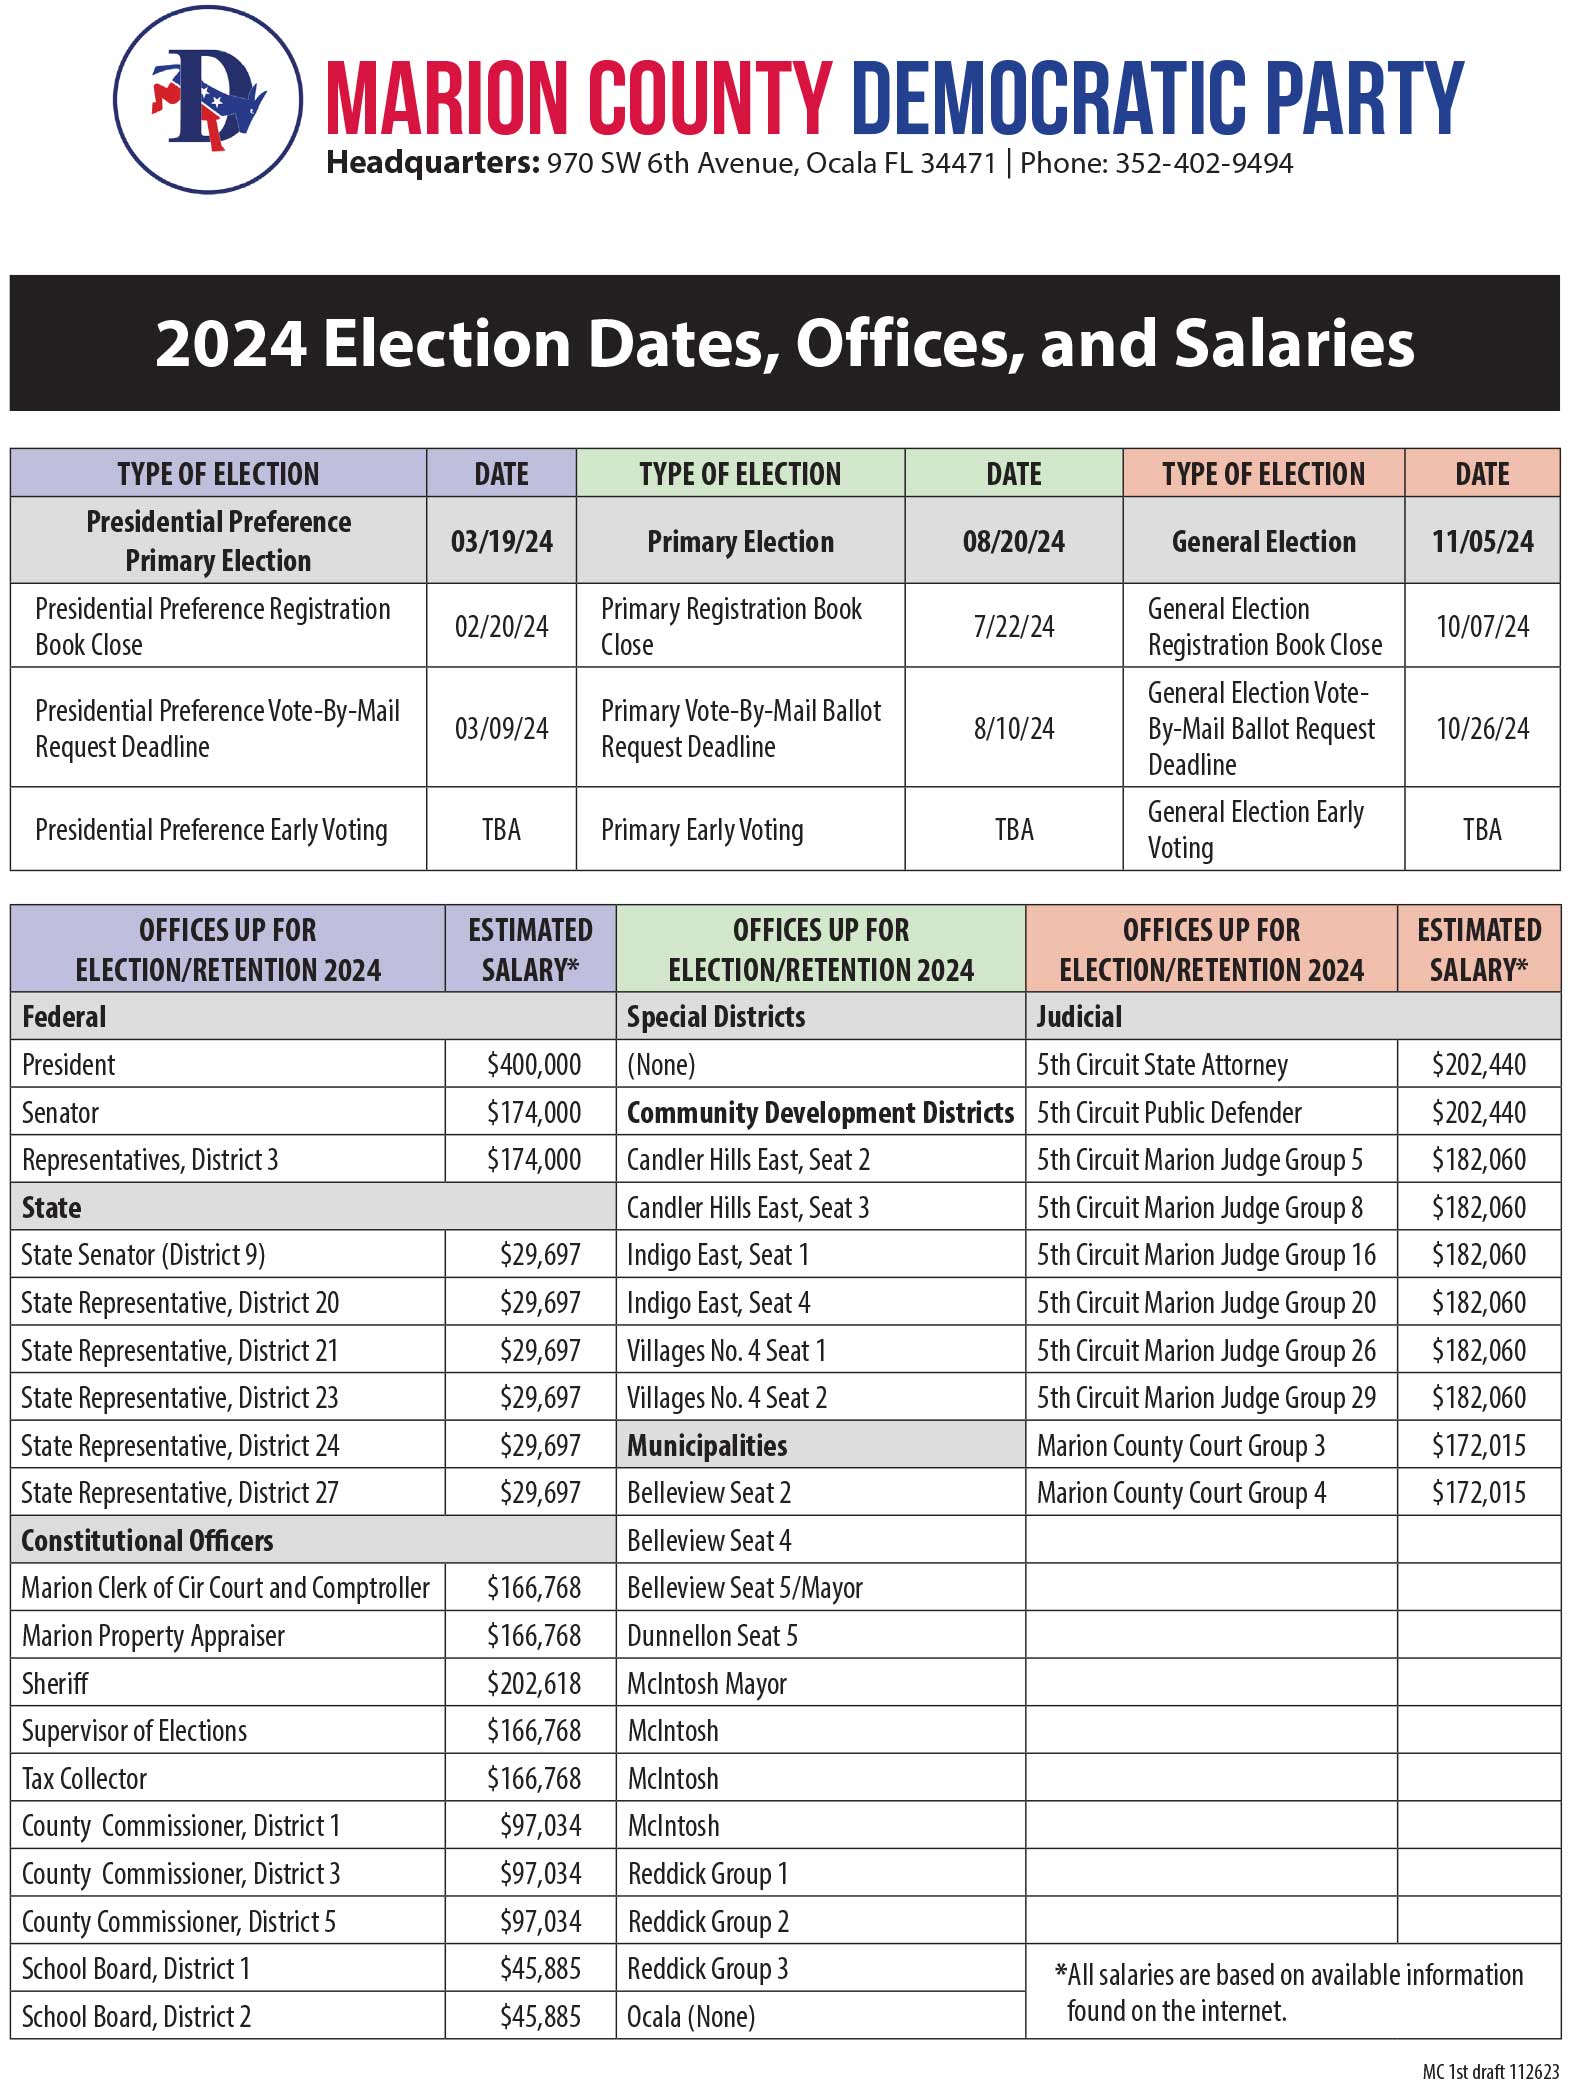 2024 Marion County Elected Offices Salaries